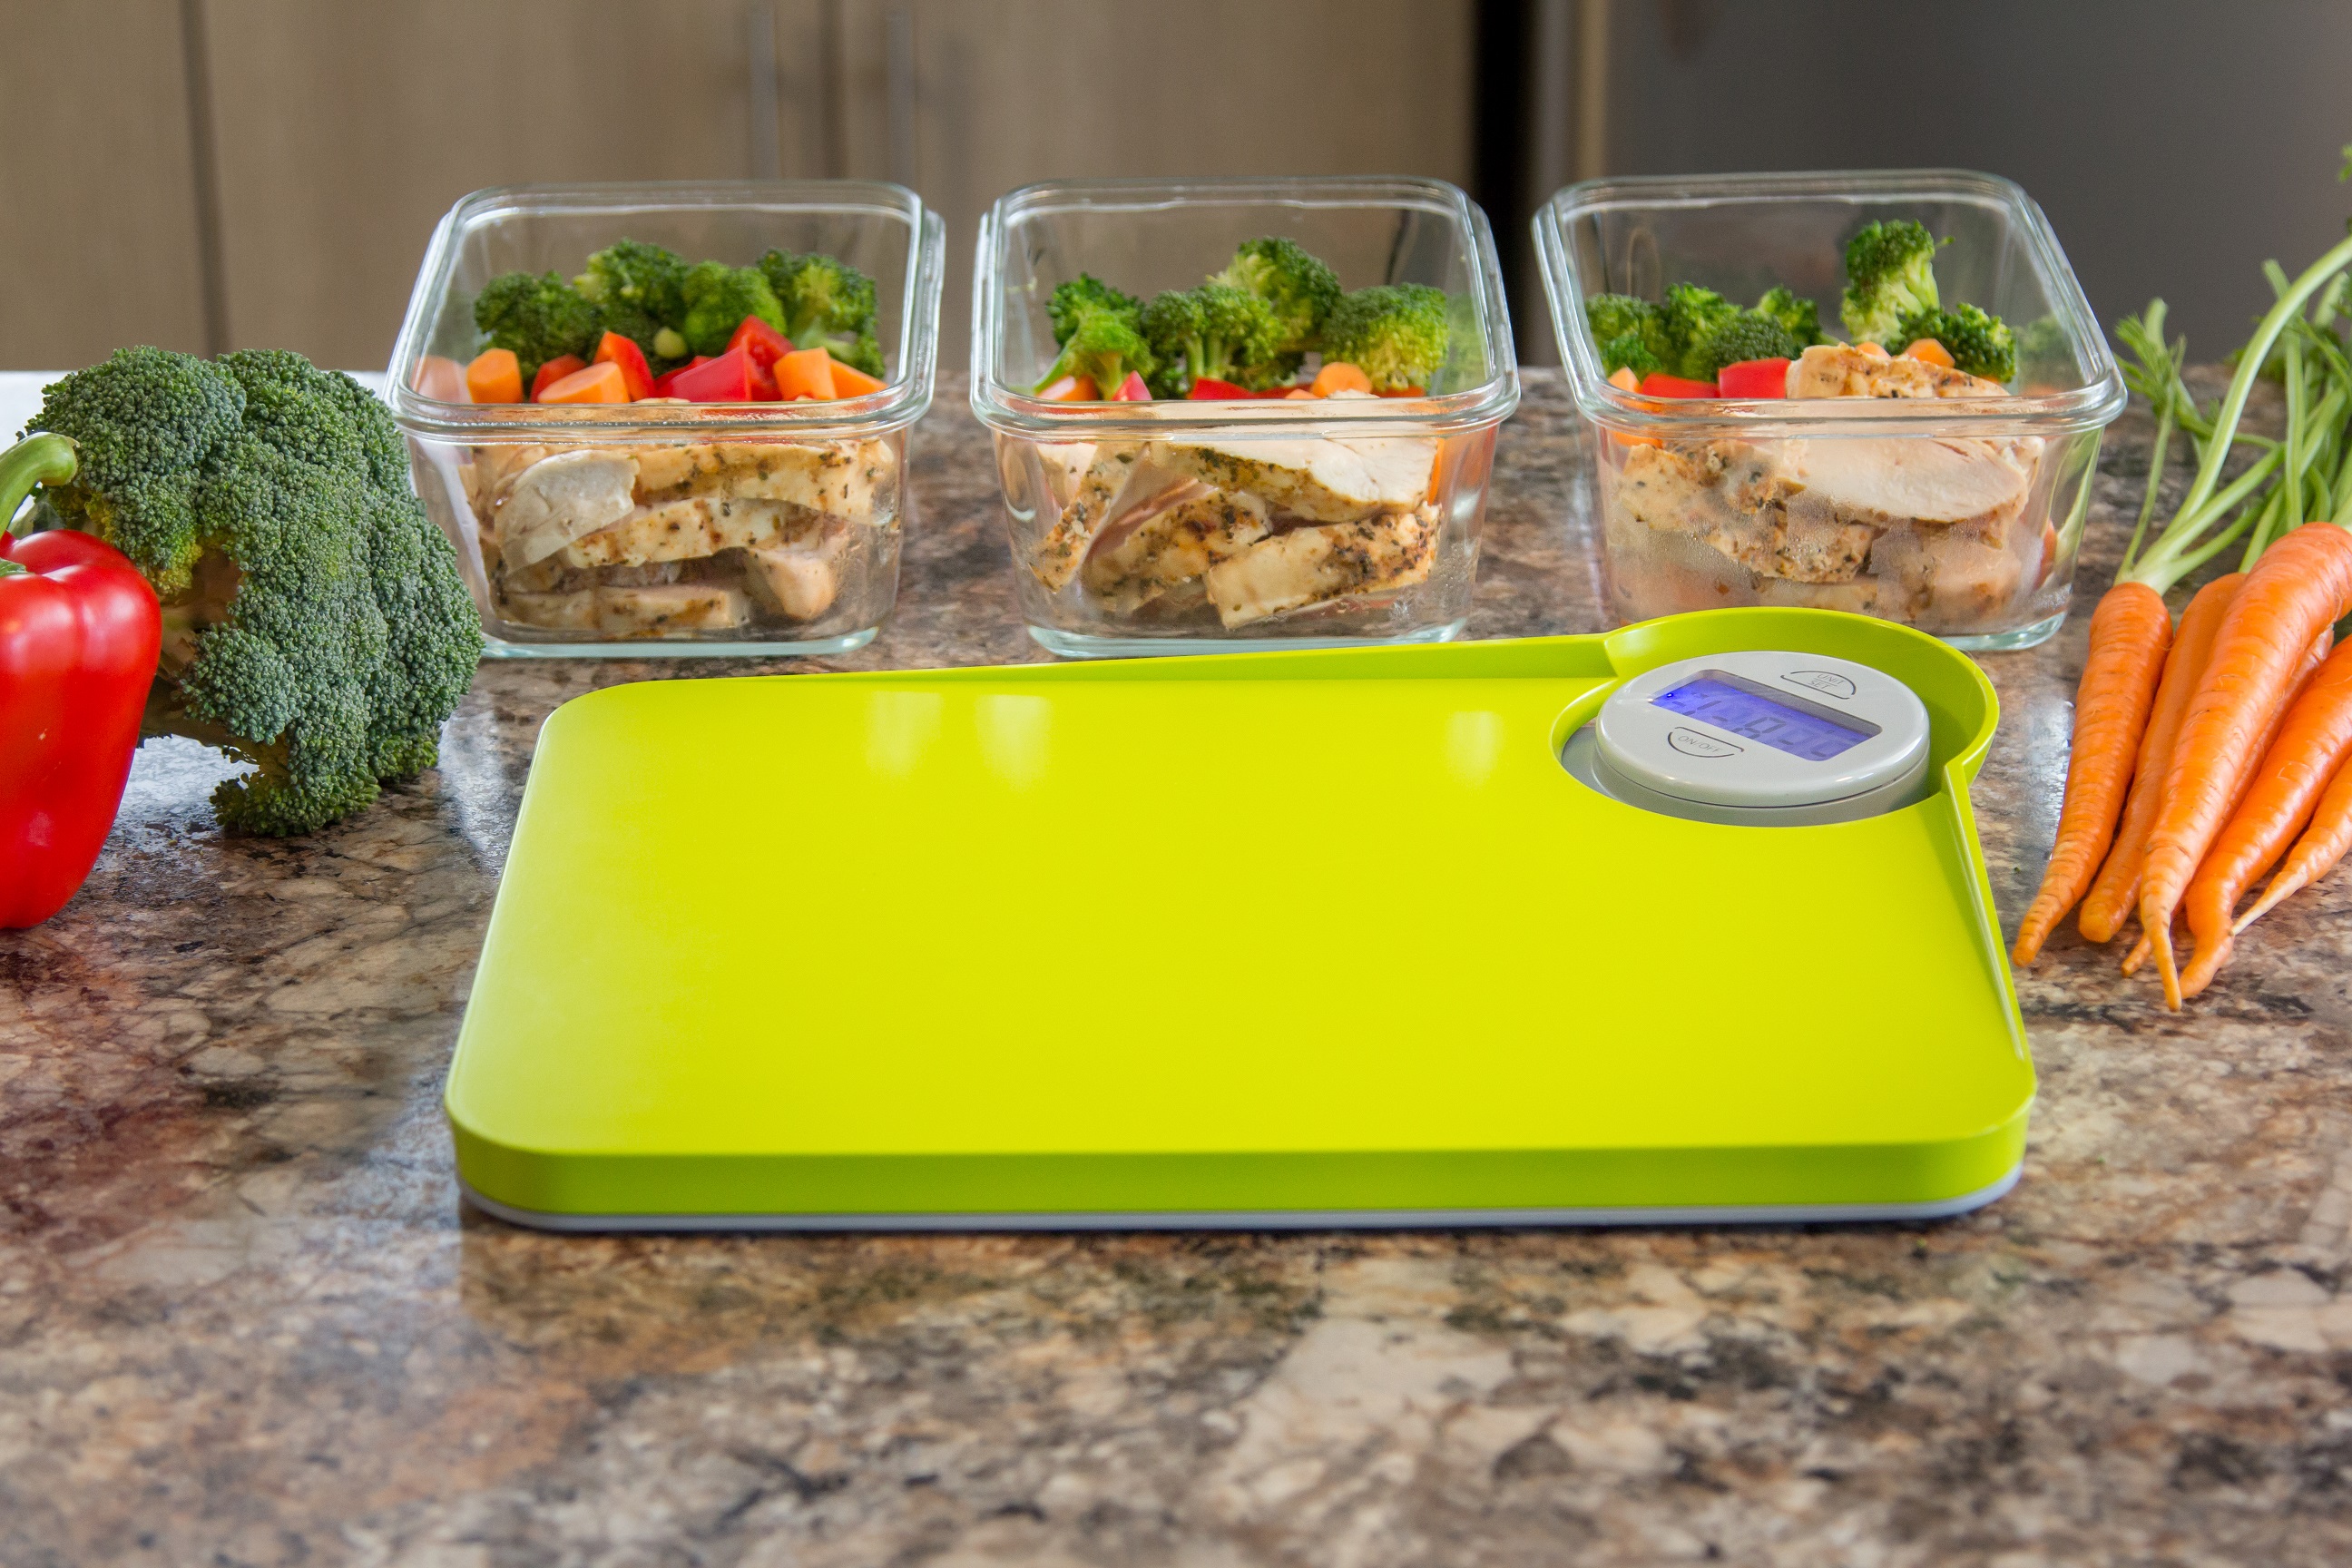 The NutriScale Board combines the functionality of a kitchen scale with a cutting board.